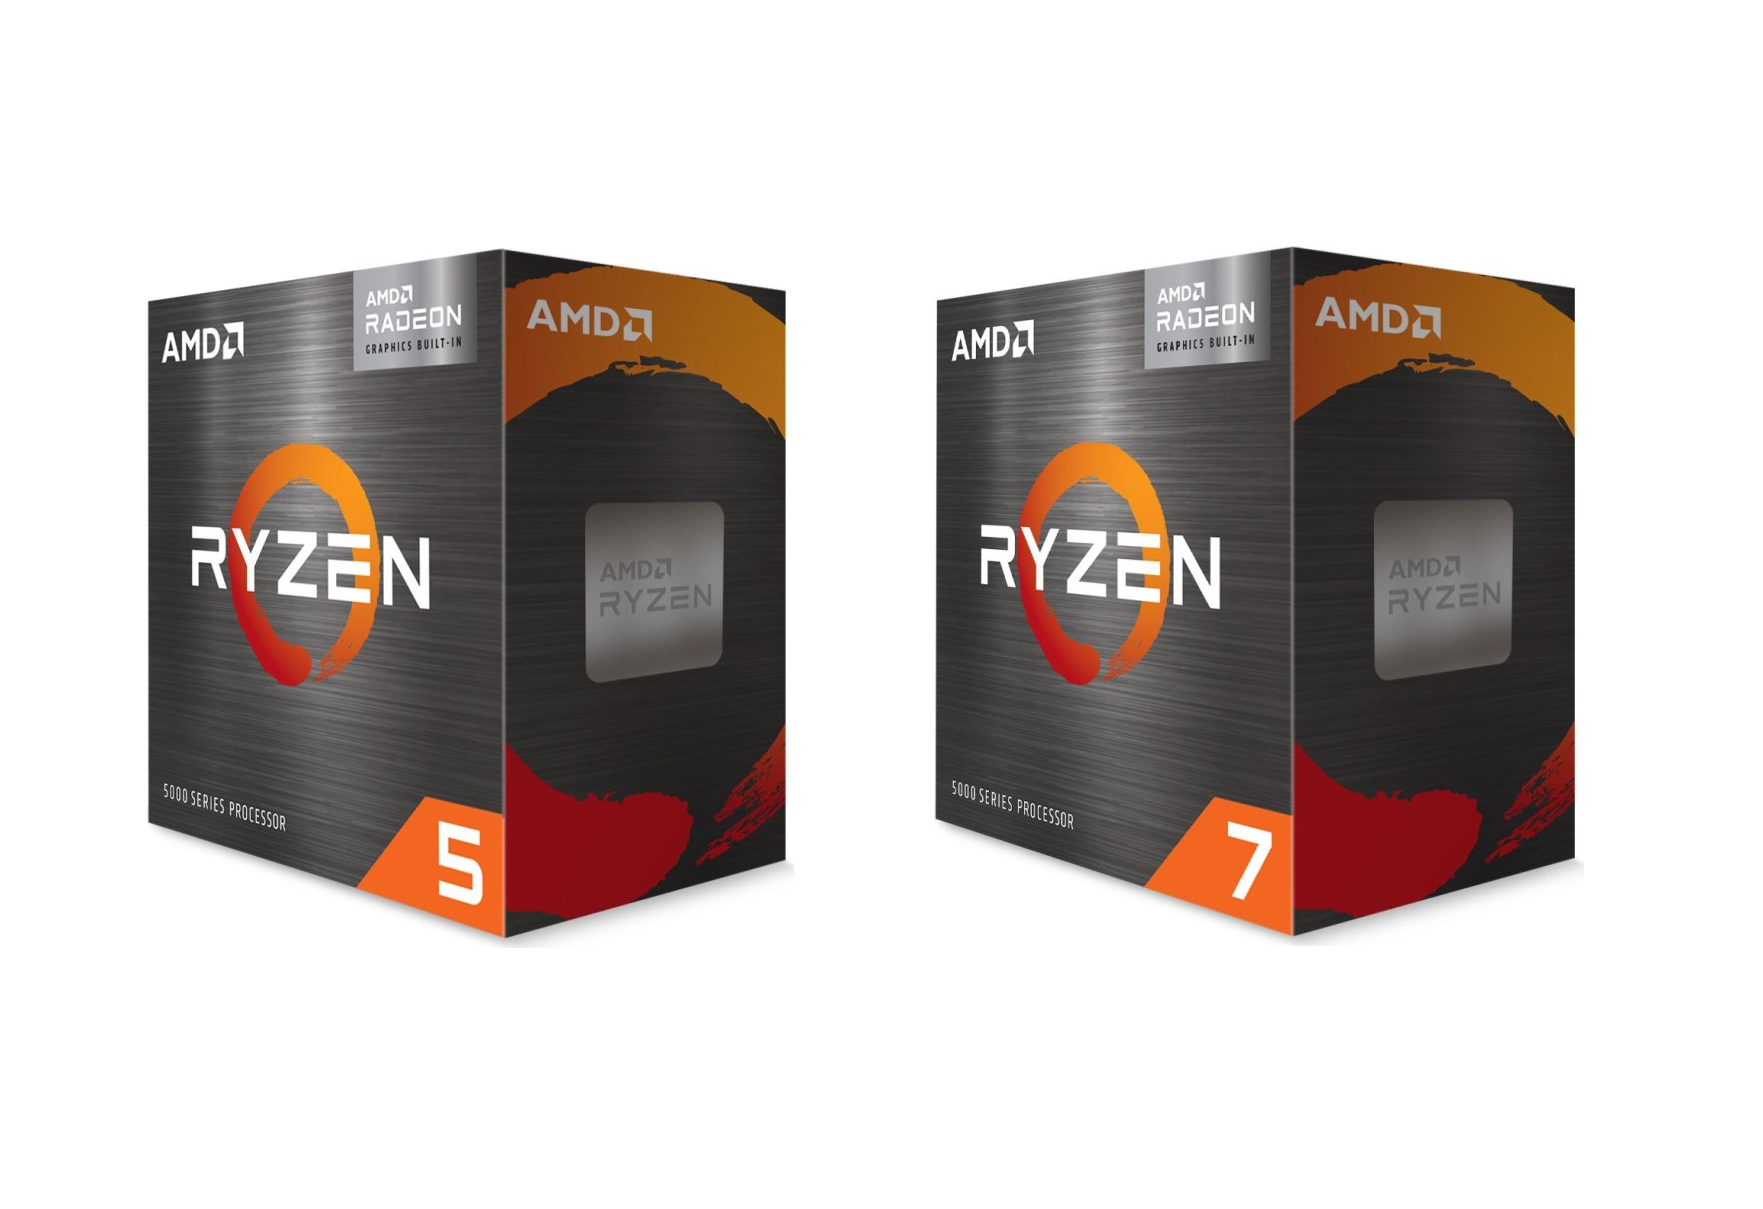 The AMD Ryzen 5 5600G and Ryzen 7 5700G desktop APUs are lastly available to snatch, albeit for Ryzen 5 5600X and Ryzen 7 5800X prices